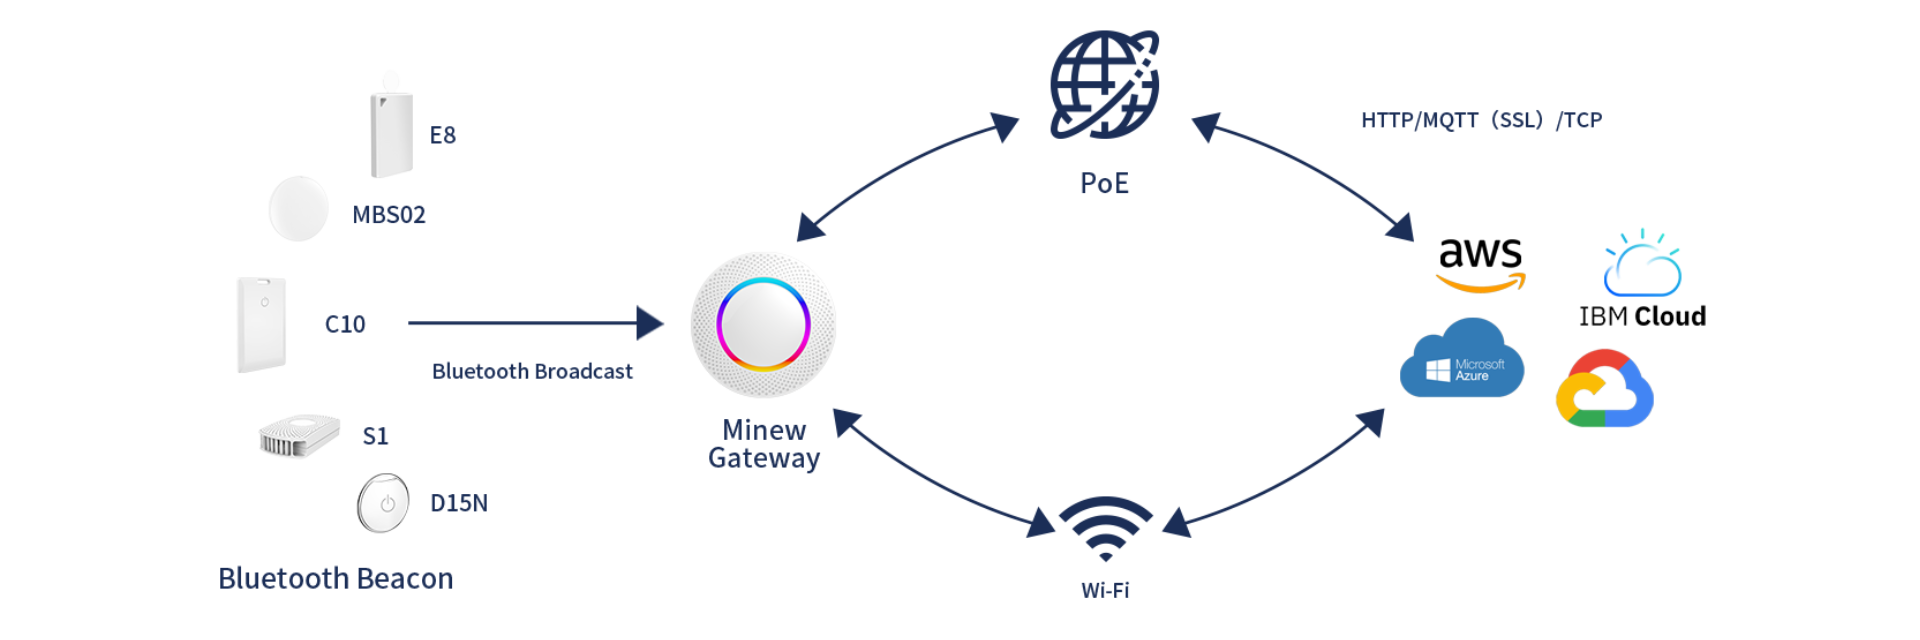 G1 IoT Gateway collects Bluetooth data and uploads it to cloud services